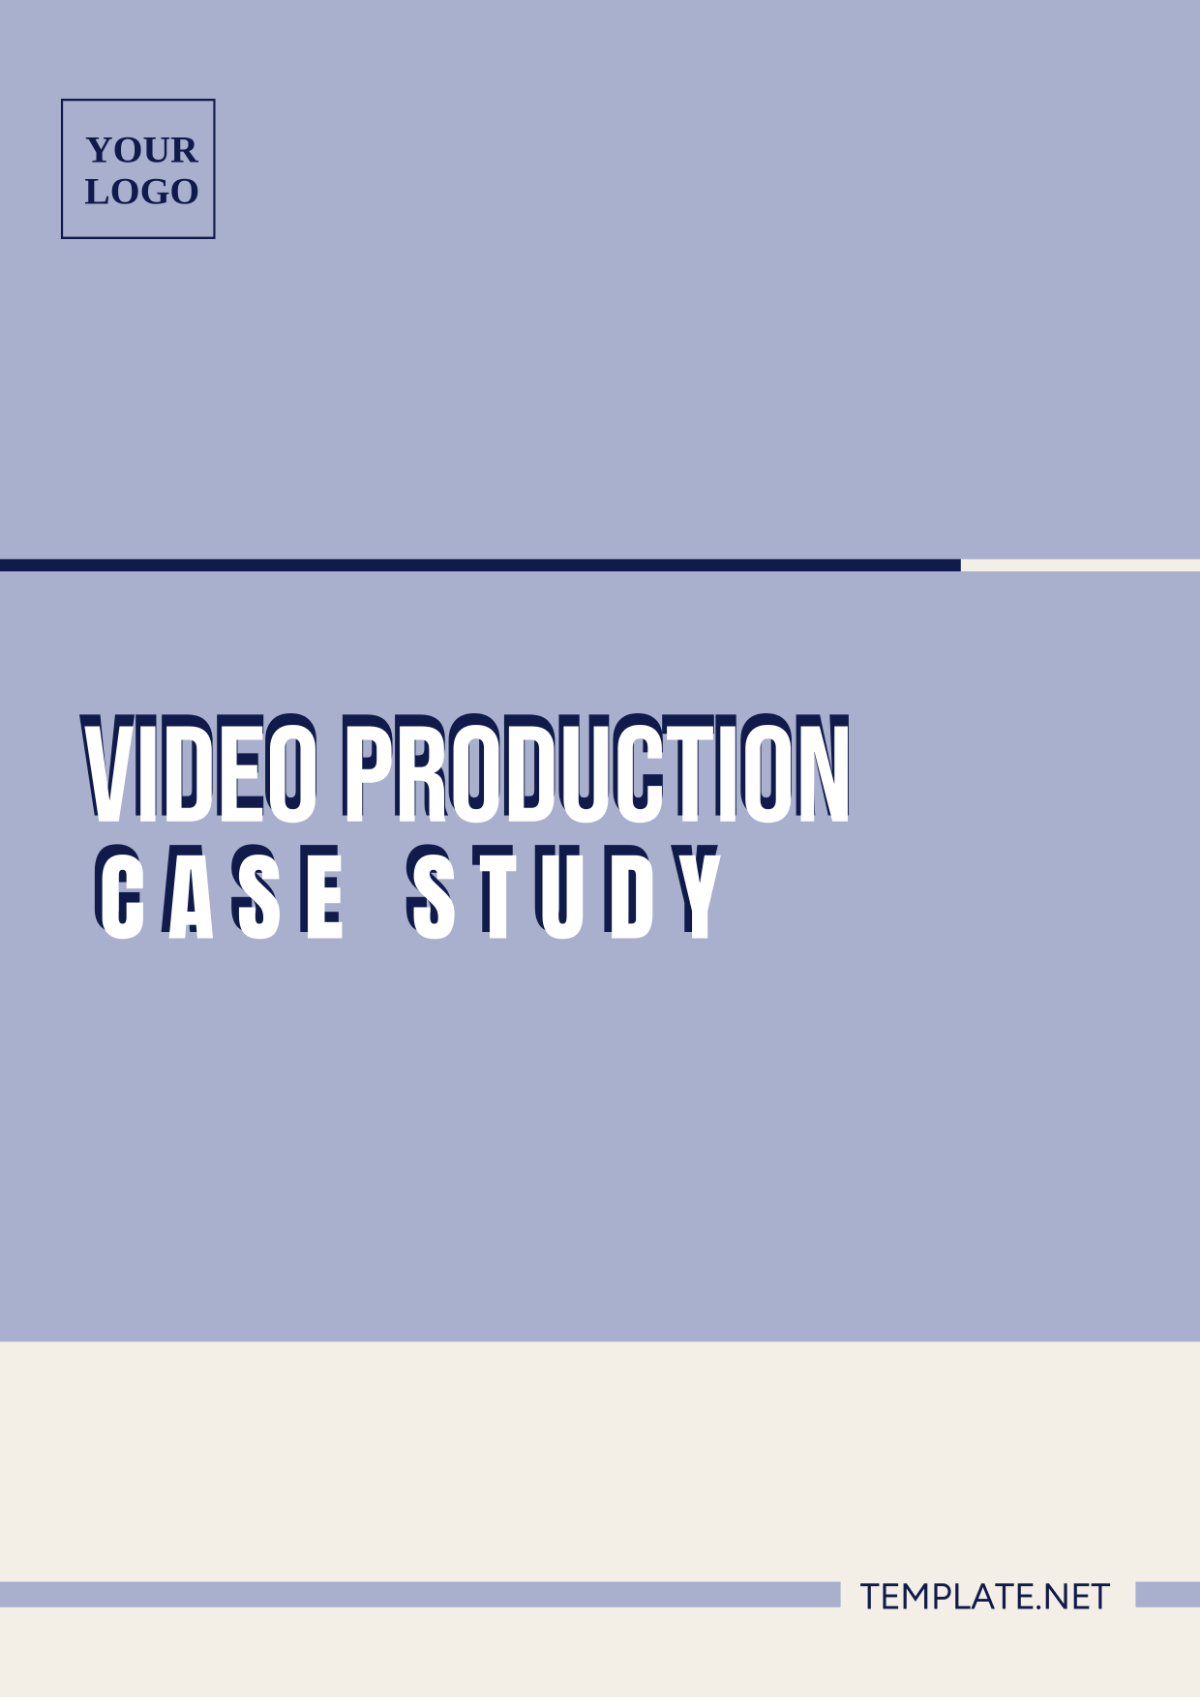 Video Production Case Study Template